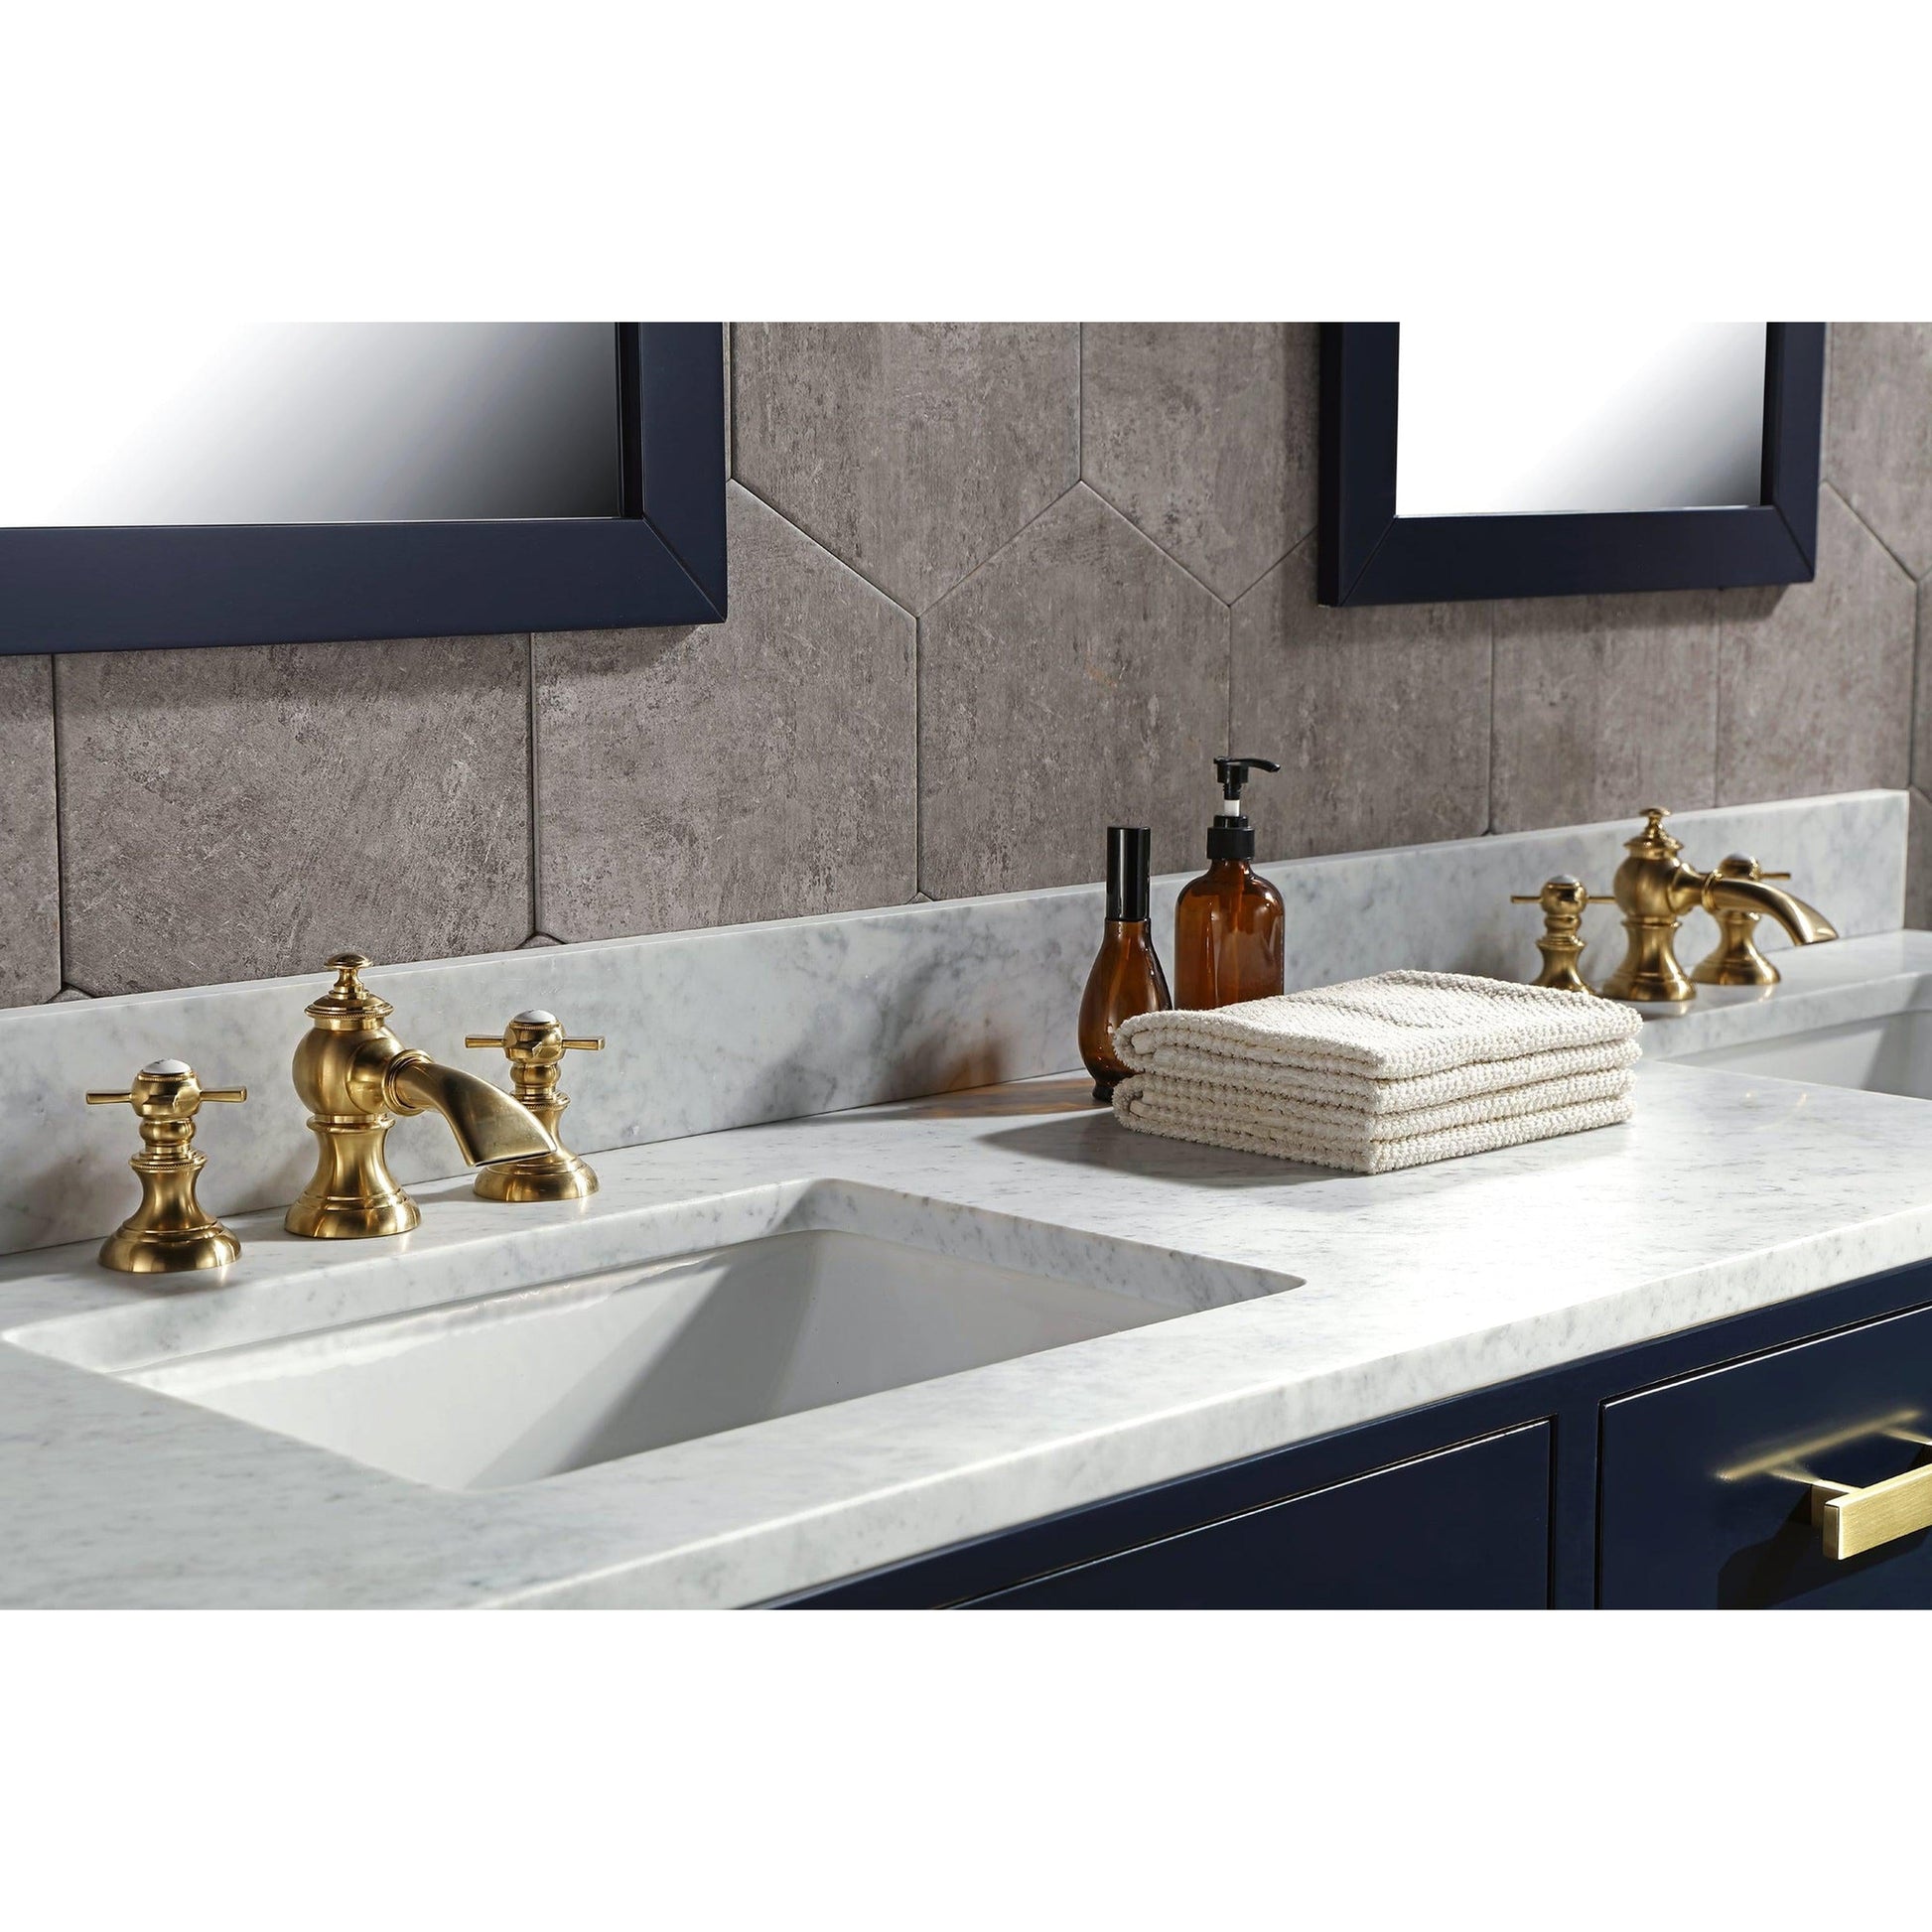 Water Creation Madison 72" Double Sink Carrara White Marble Vanity In Monarch Blue With Matching Mirror(s) and F2-0013-06-FX Lavatory Faucet(s)